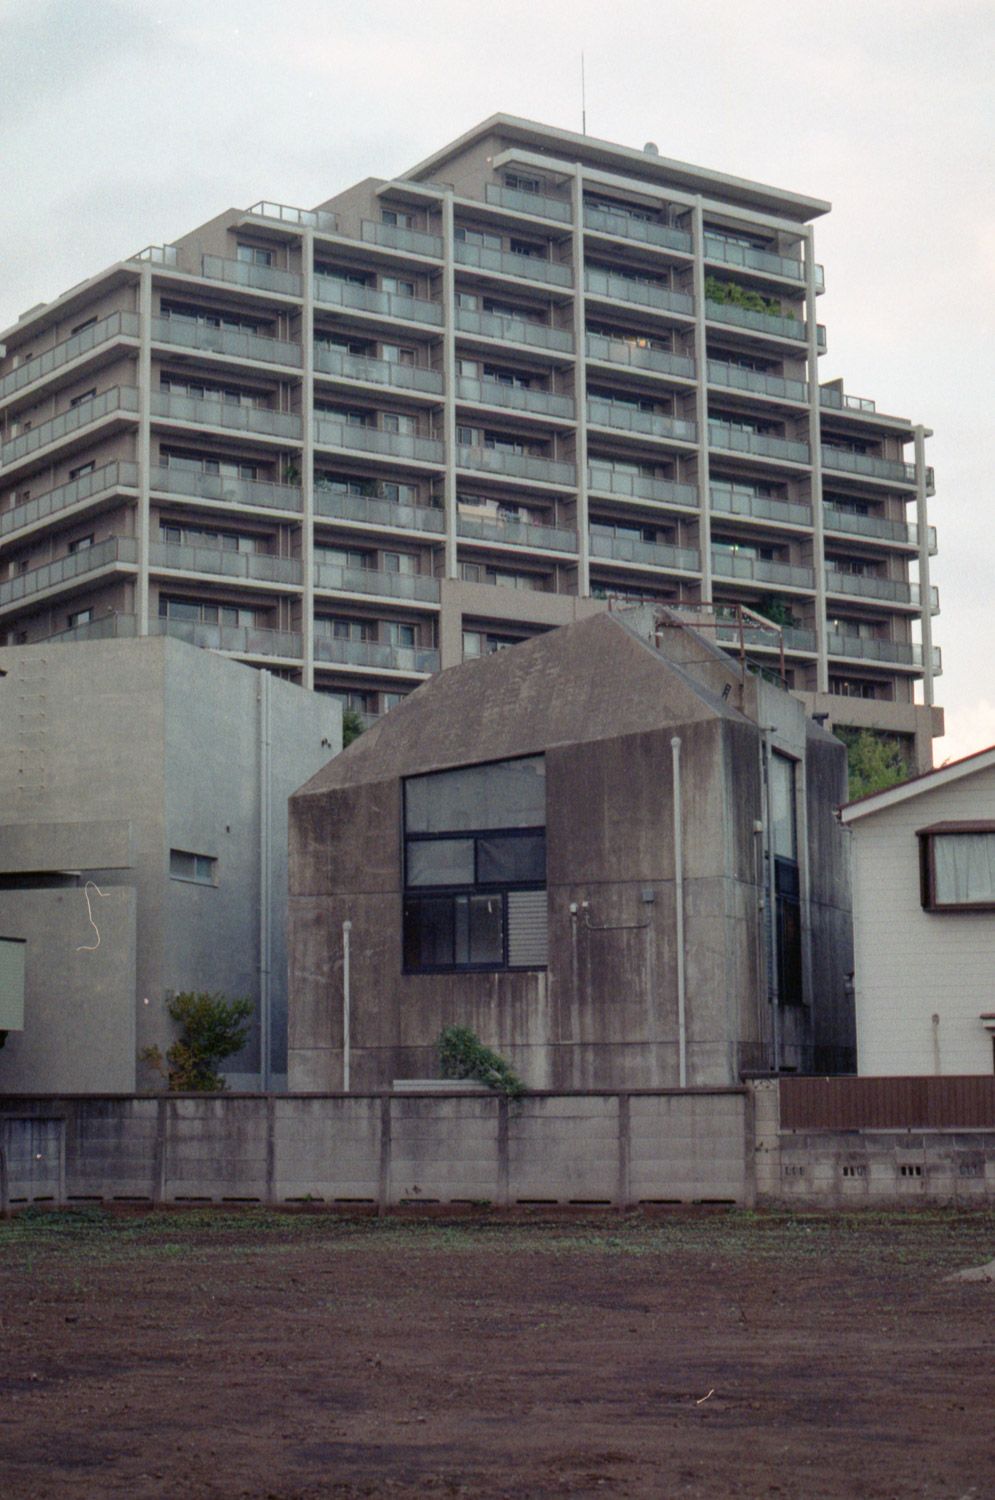 A love(?) letter to Tokyo architecture